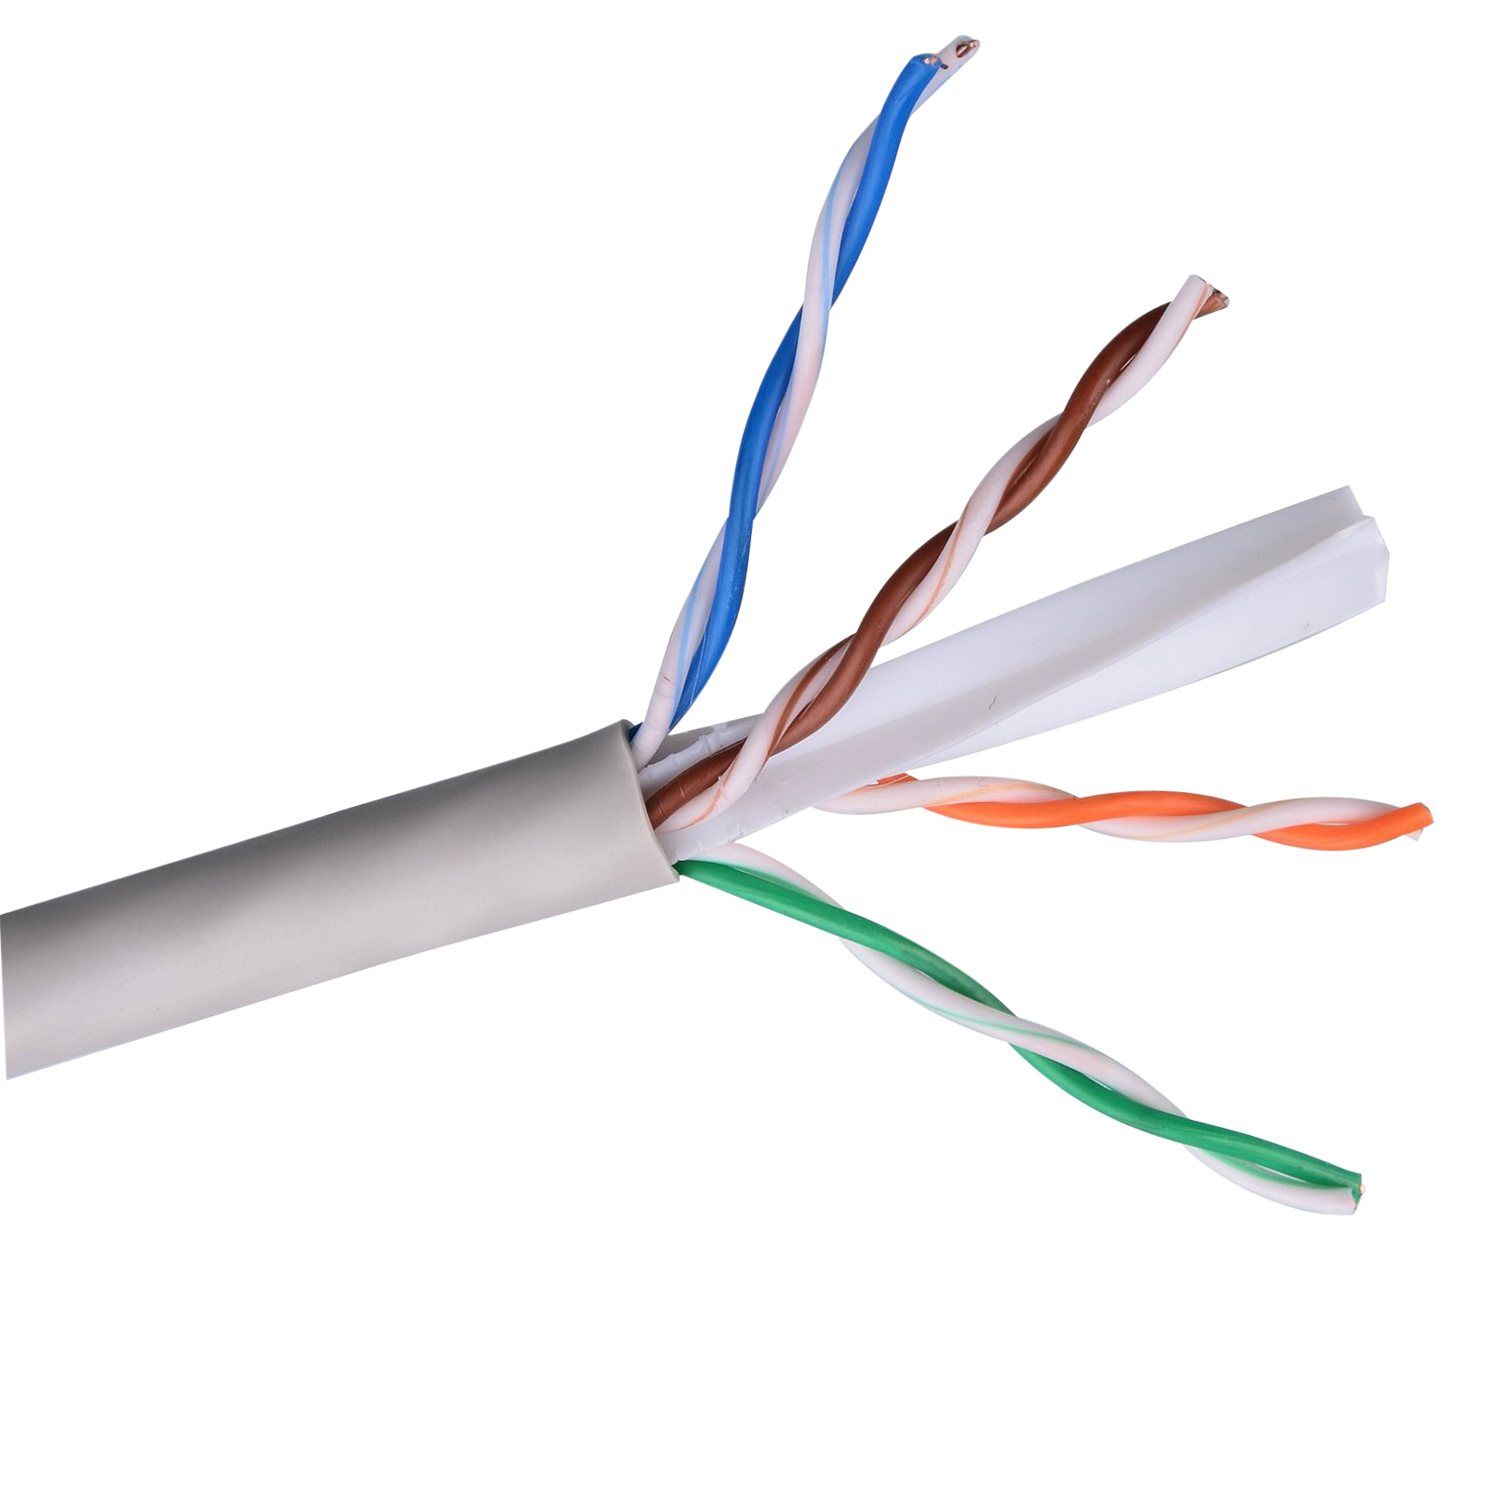 ExeGate - Products - Archive - Cables - Network cables - UTP Network Cable